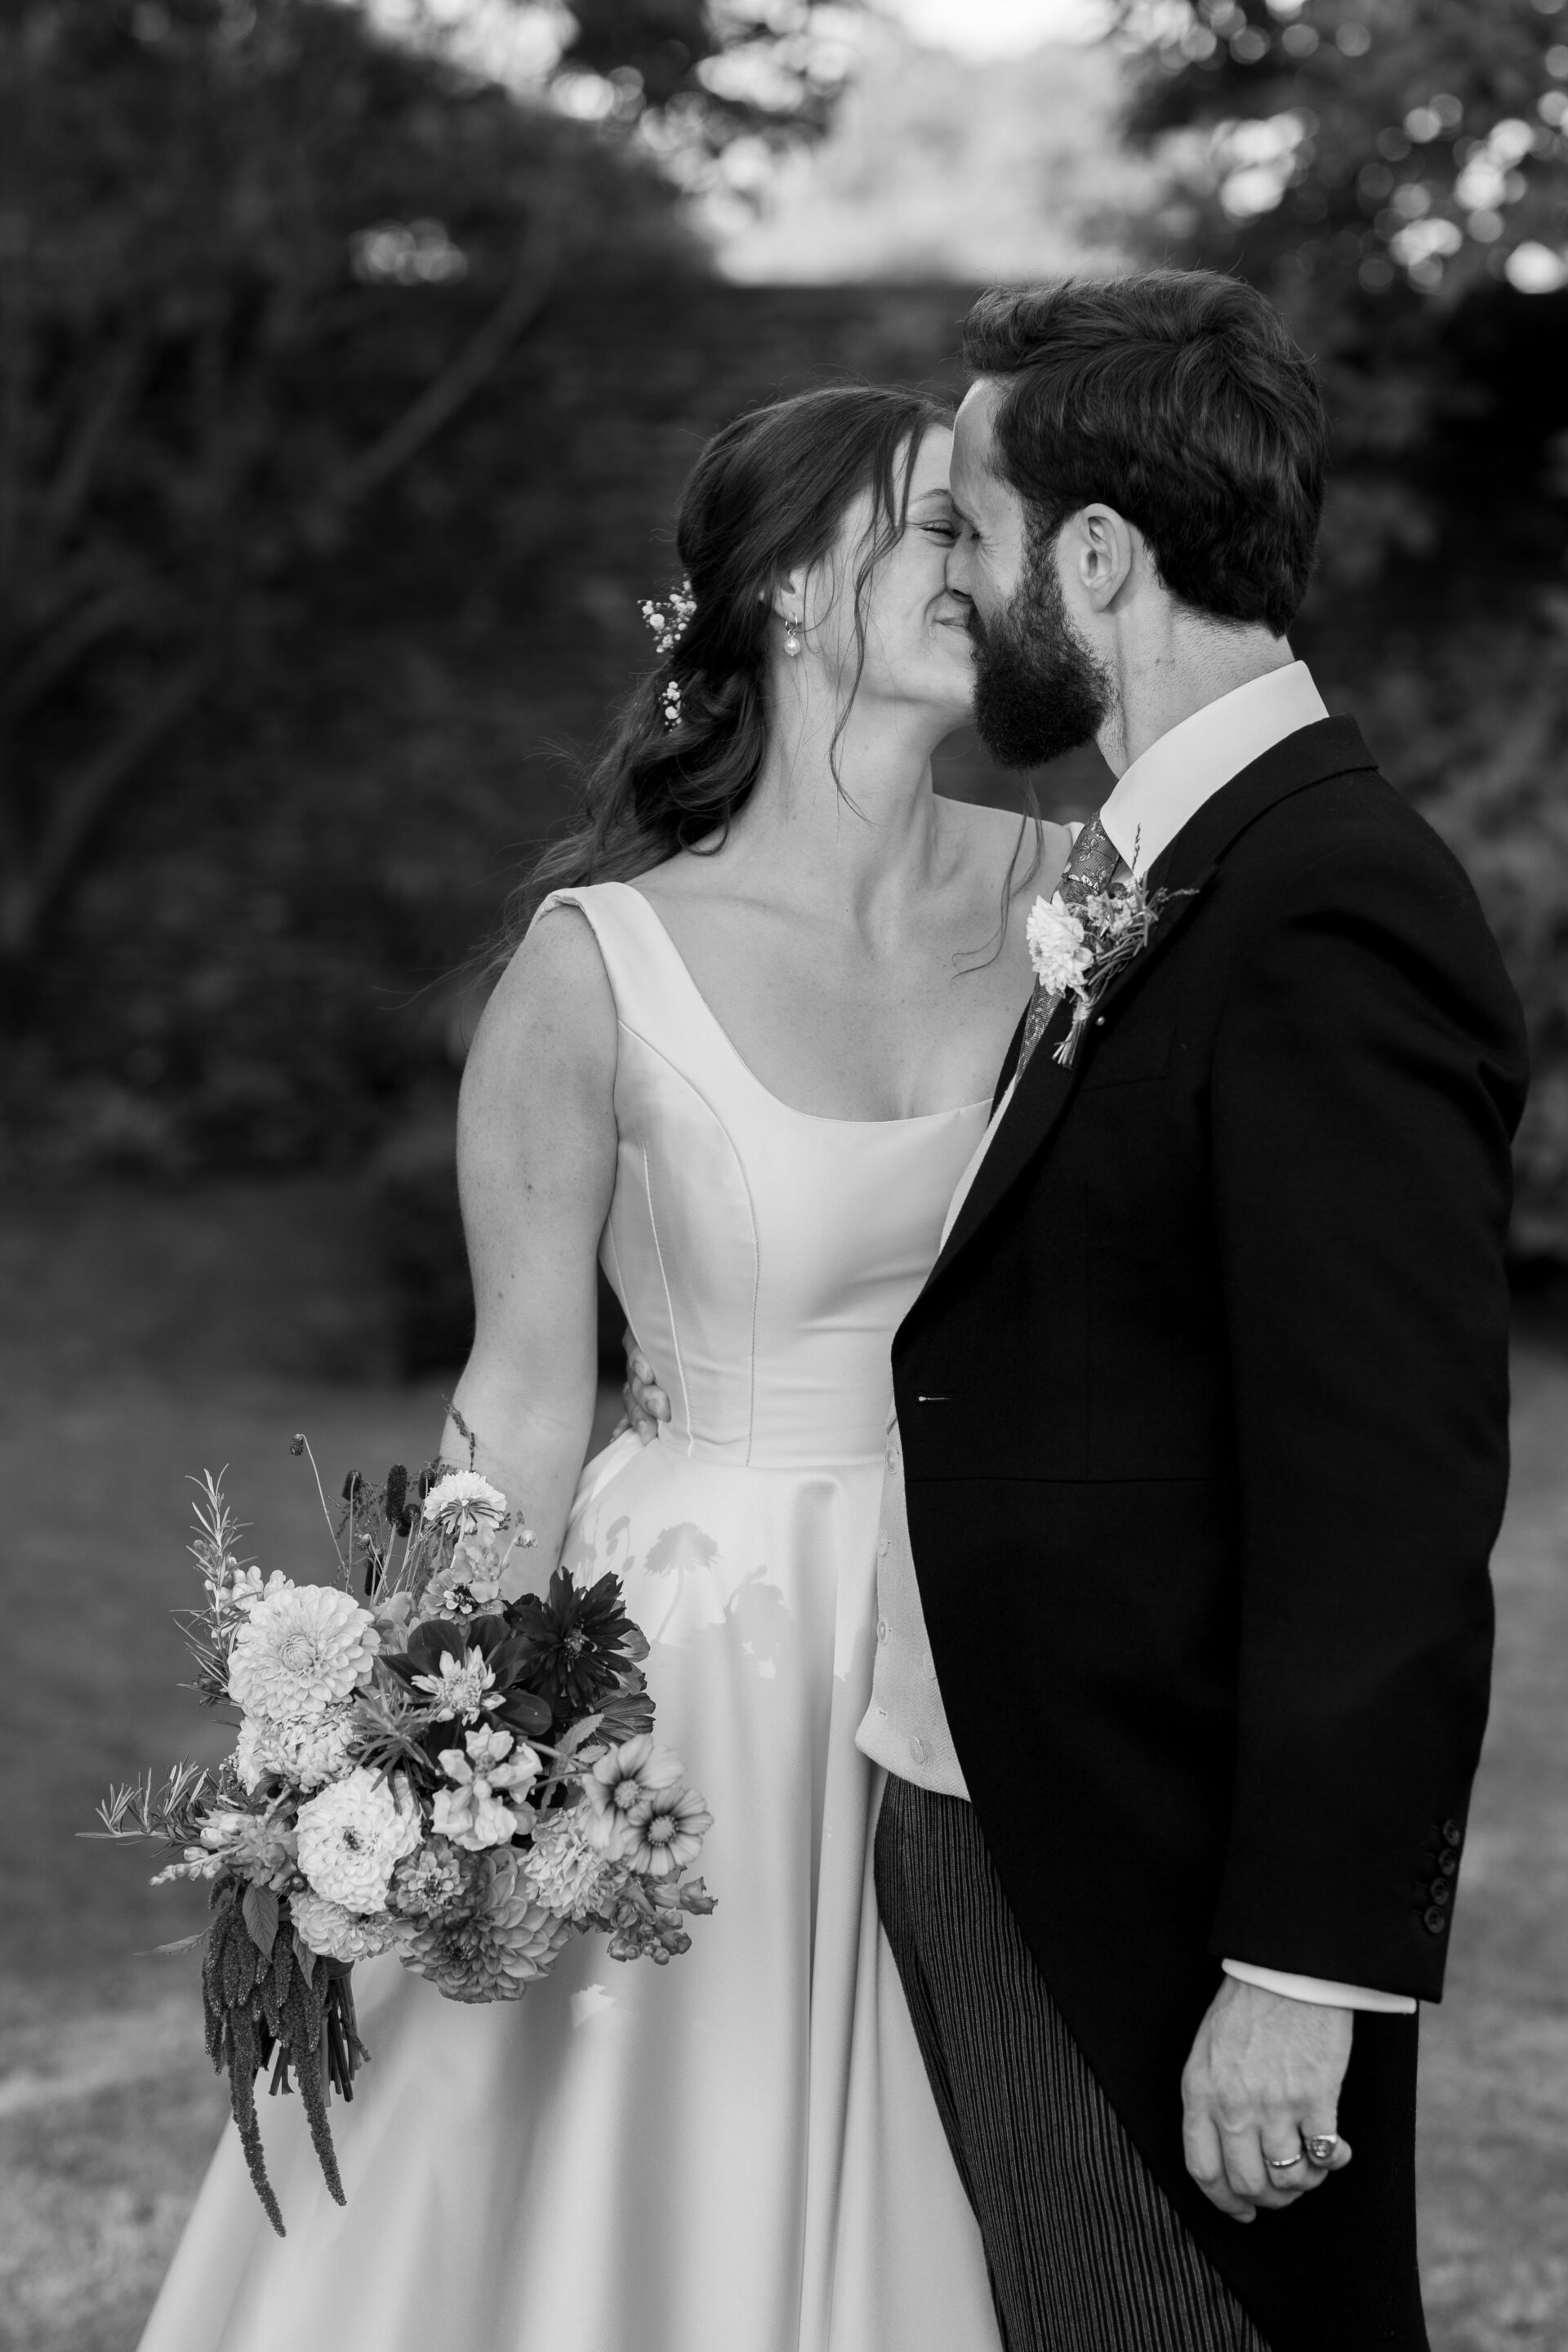 The bride and groom share a kiss during their Somerset marquee wedding reception